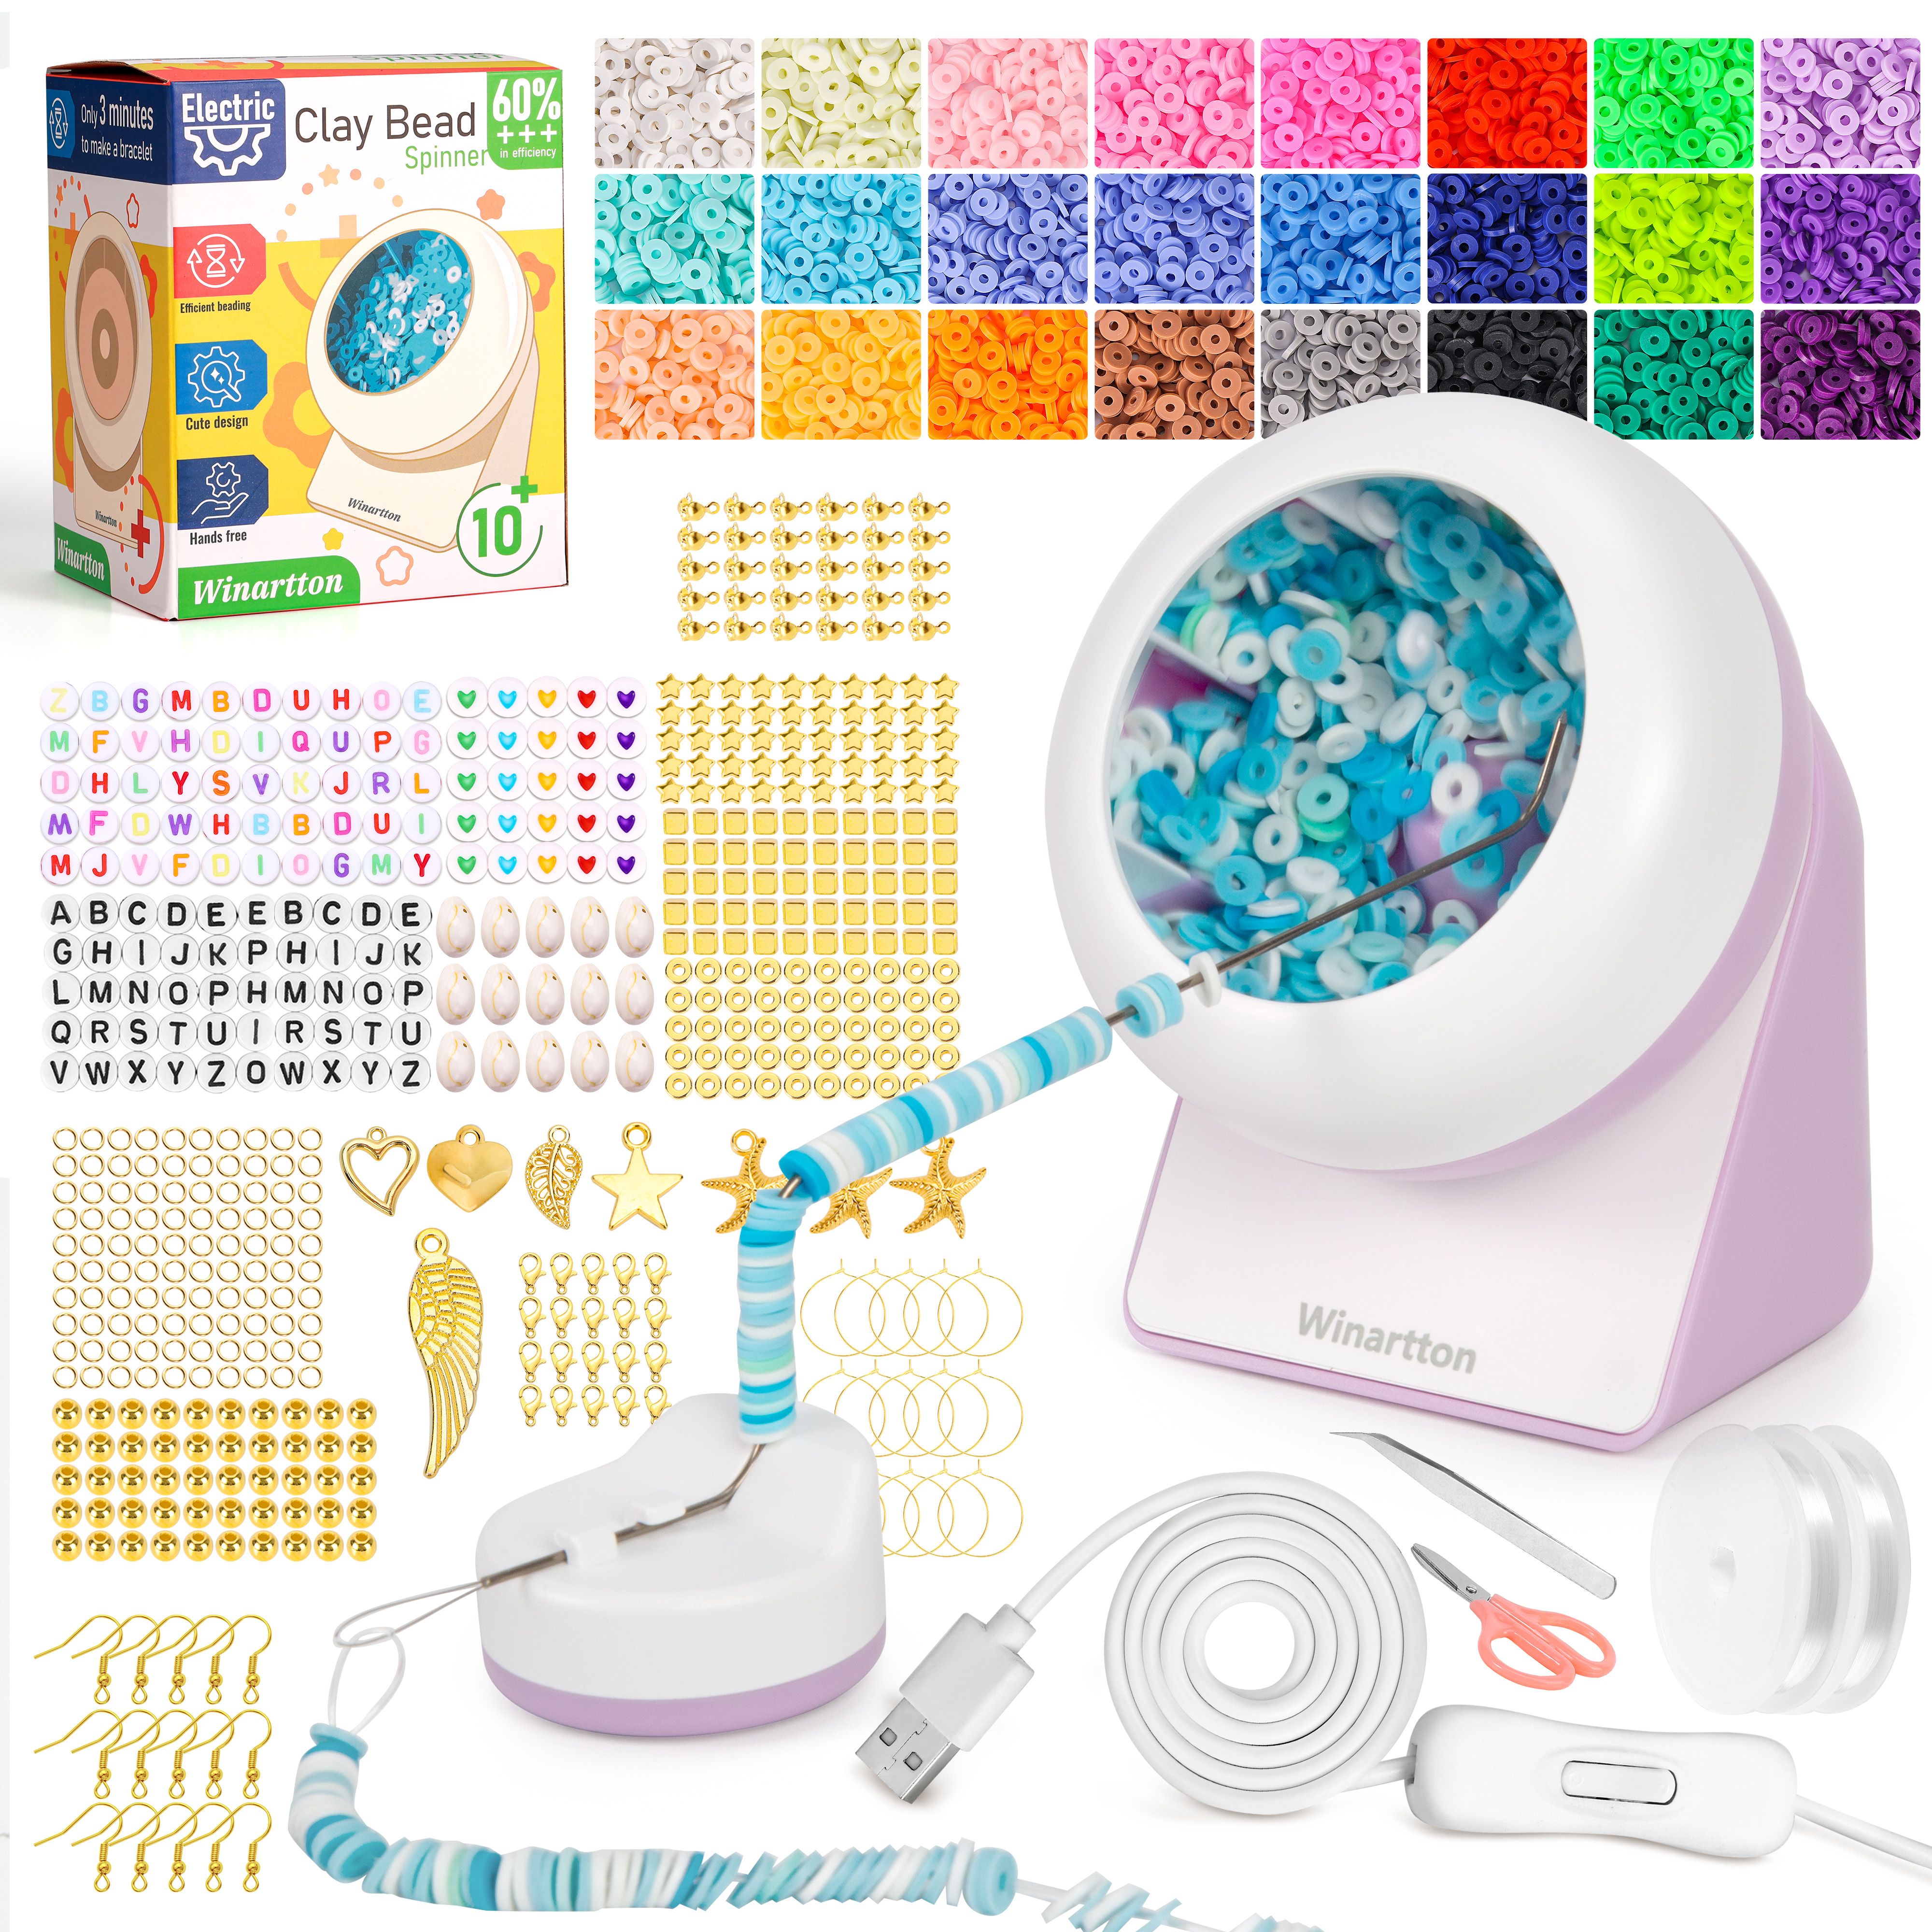 Electric Bead Spinner Kit For Jewelry Making Boost Efficiency And